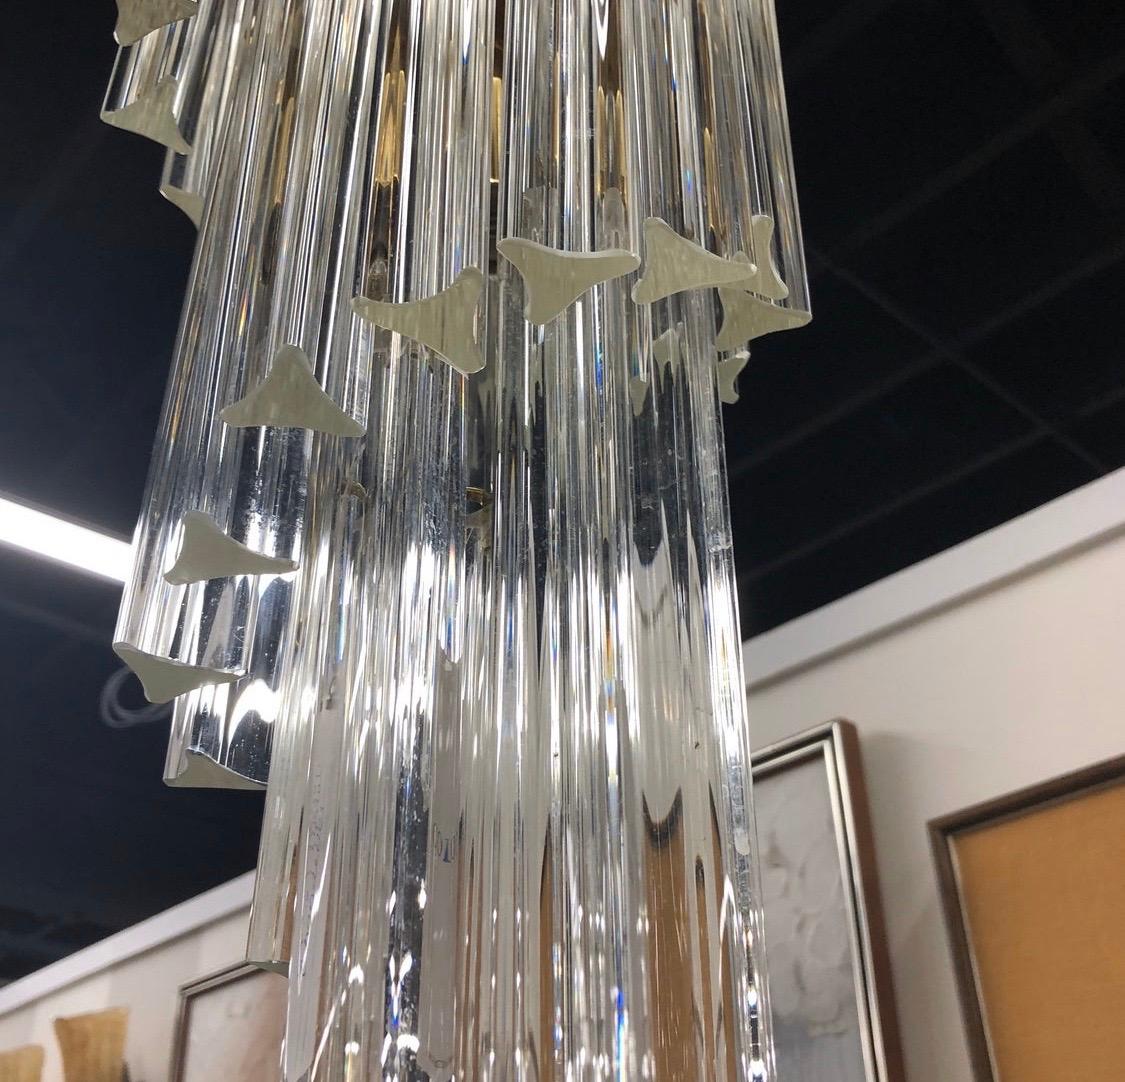 Stunning Mid-Century Modern Camer Murano glass waterfall chandelier that is fifty-five tall.
It is unusual to see chandeliers this tall. Would look perfect in almost any environment.